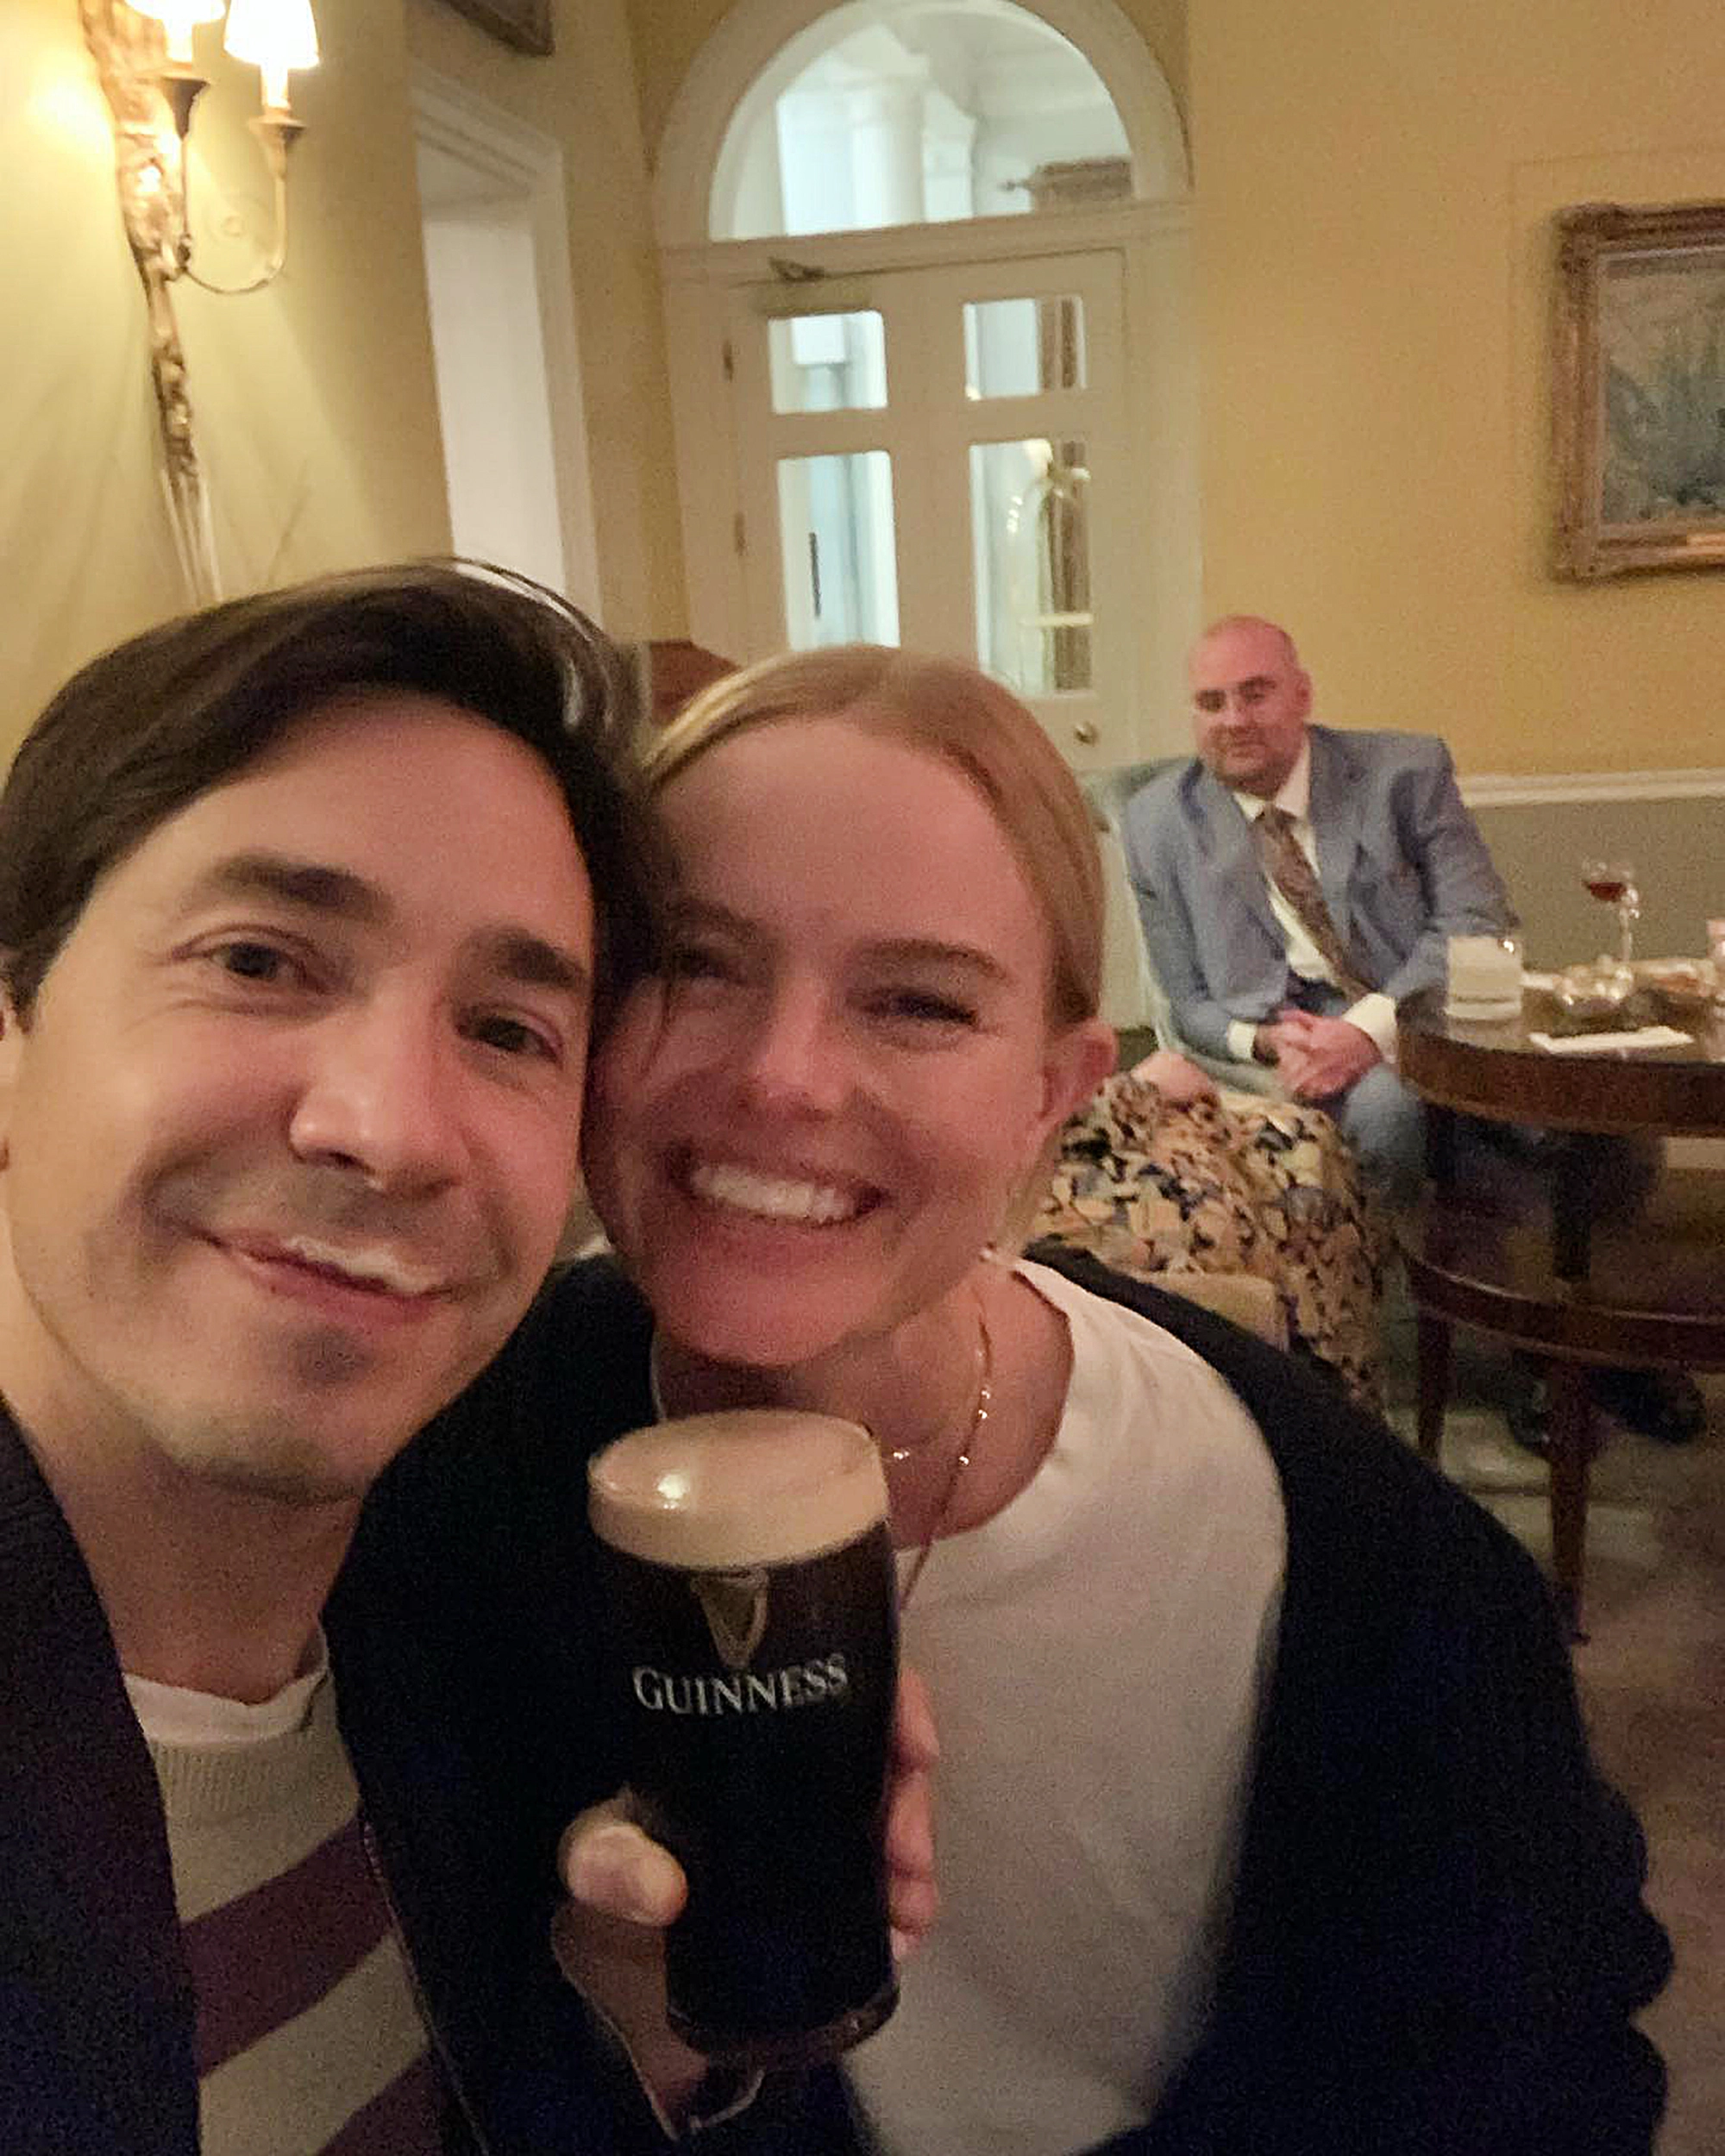 Hollywood Couple Justin Long And Kate Bosworth Share Sweet Snaps From Secret Trip To Ireland